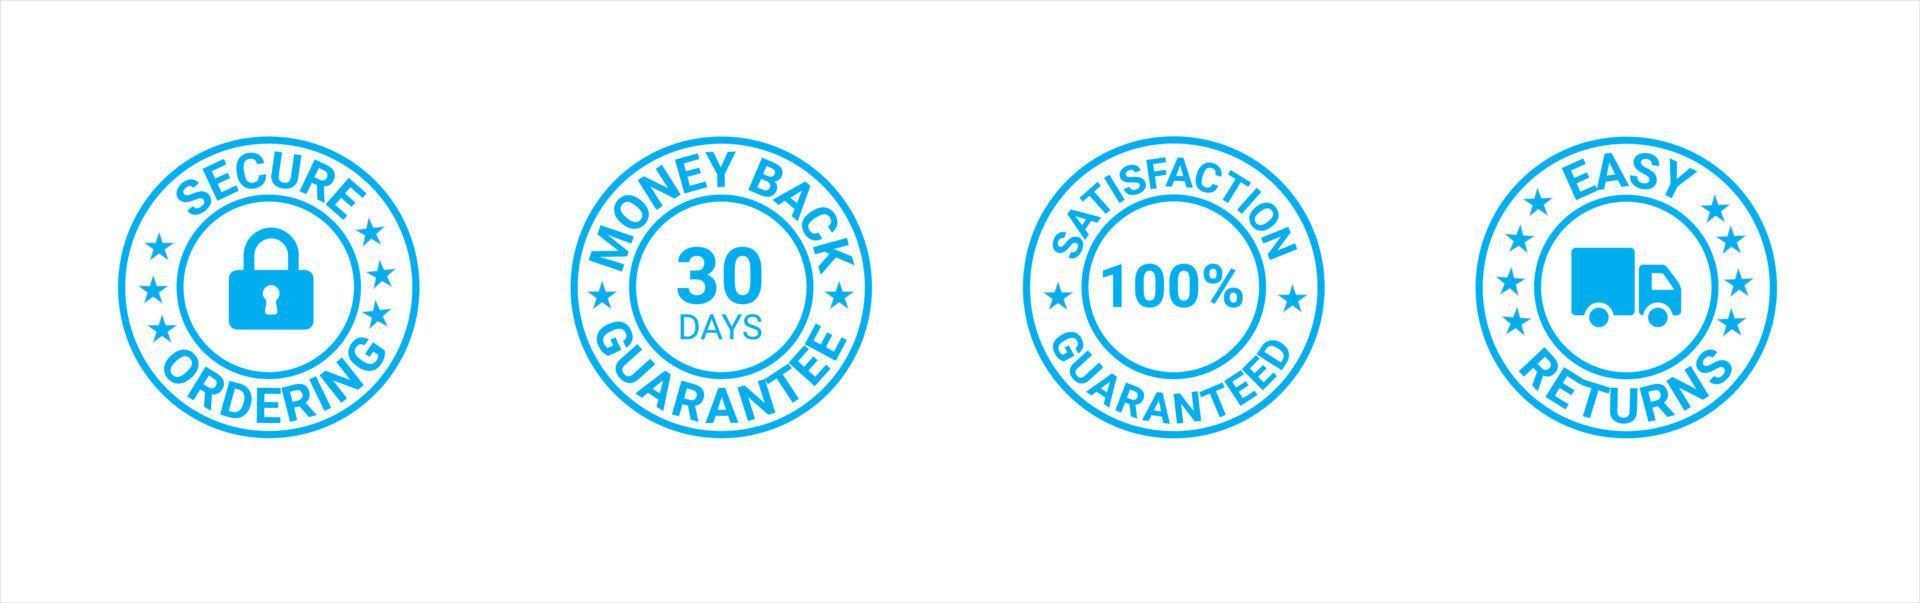 Money back guarantee, Free Shipping Trust Badges ,Trust Badges, secure ordering, easy returns vector